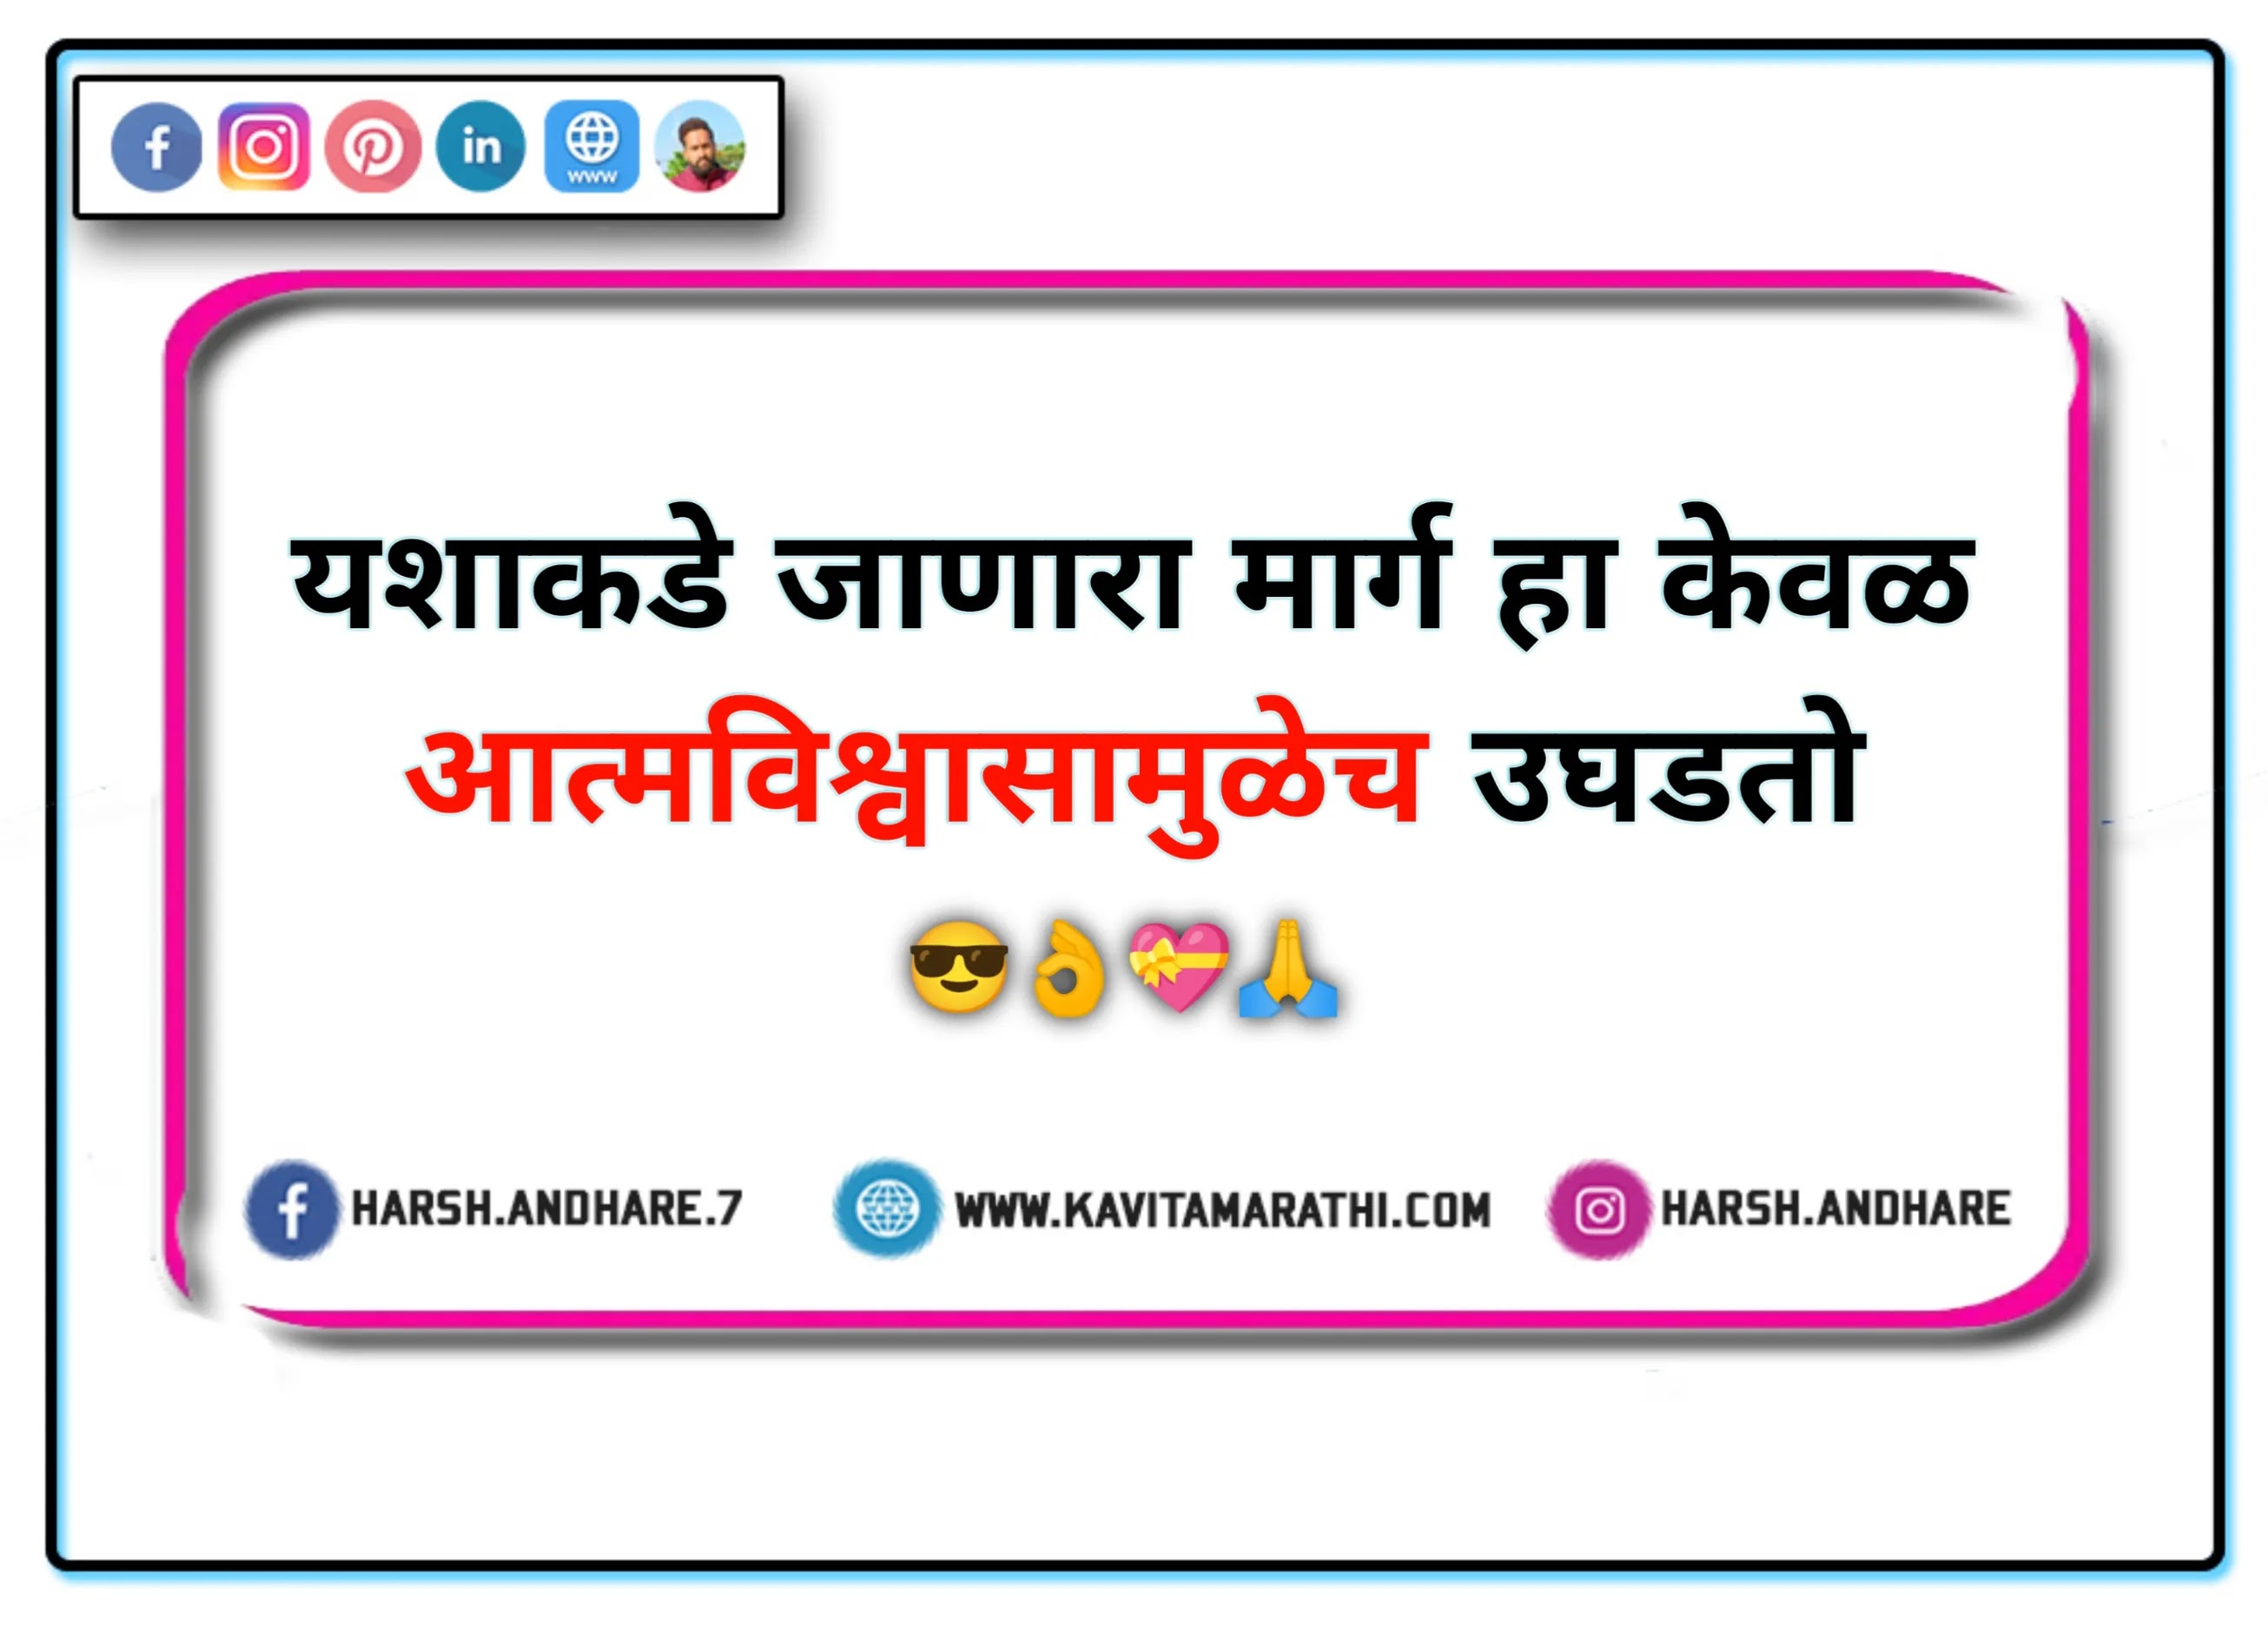 Good Thoughts in Marathi Tex